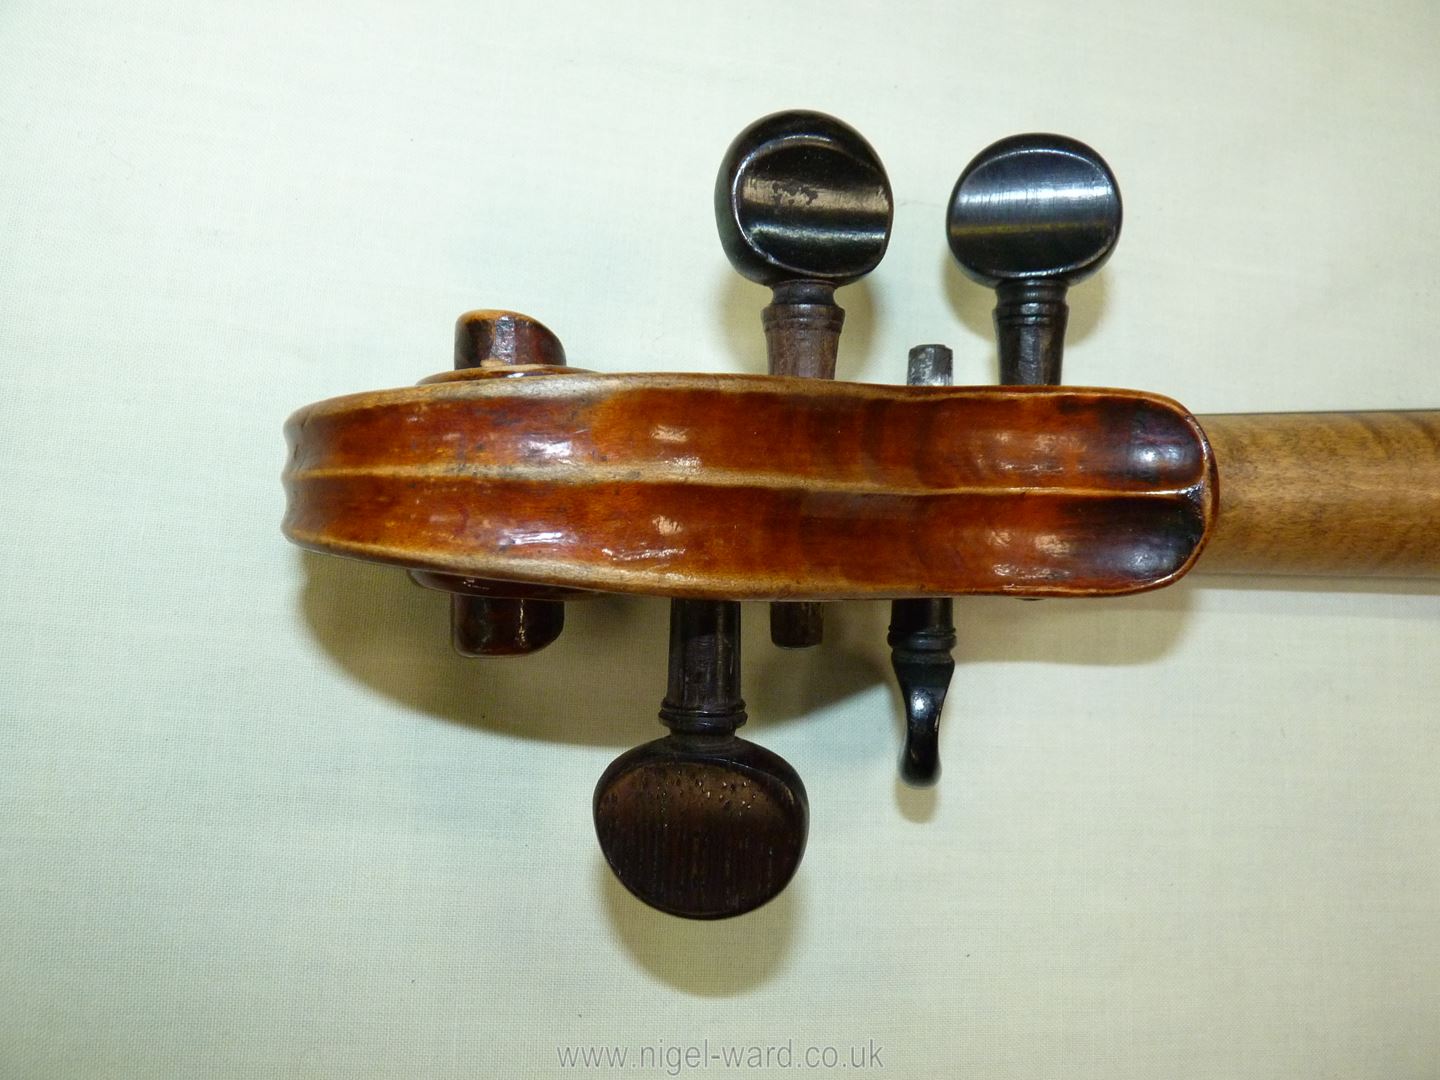 An antique violin having a well-carved scroll and nicely figured body including the back, - Image 11 of 49